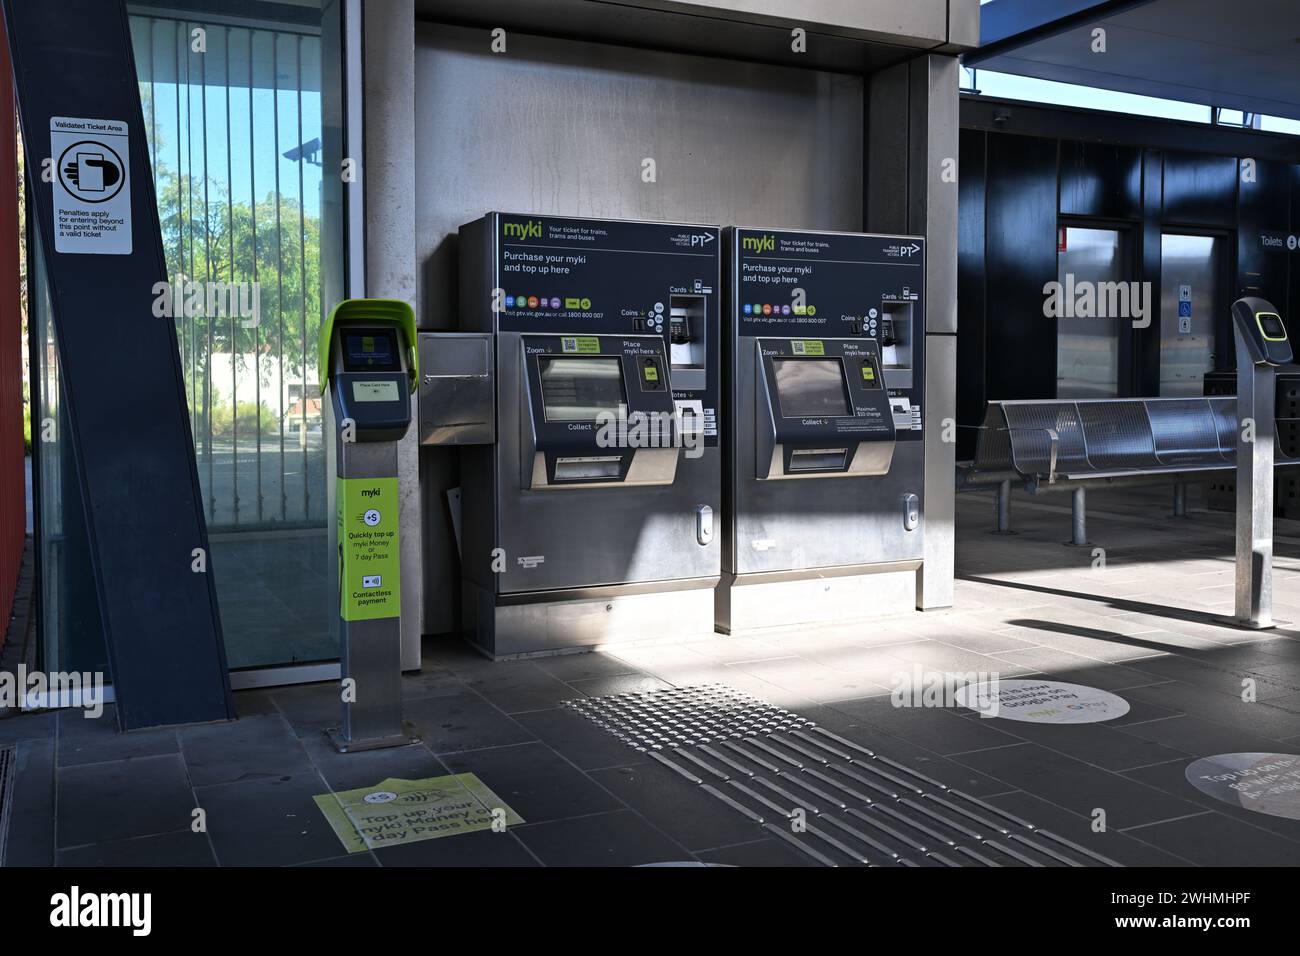 Myki ticket machines at the entrance to Ormond Railway Station, during a sunny day Stock Photo